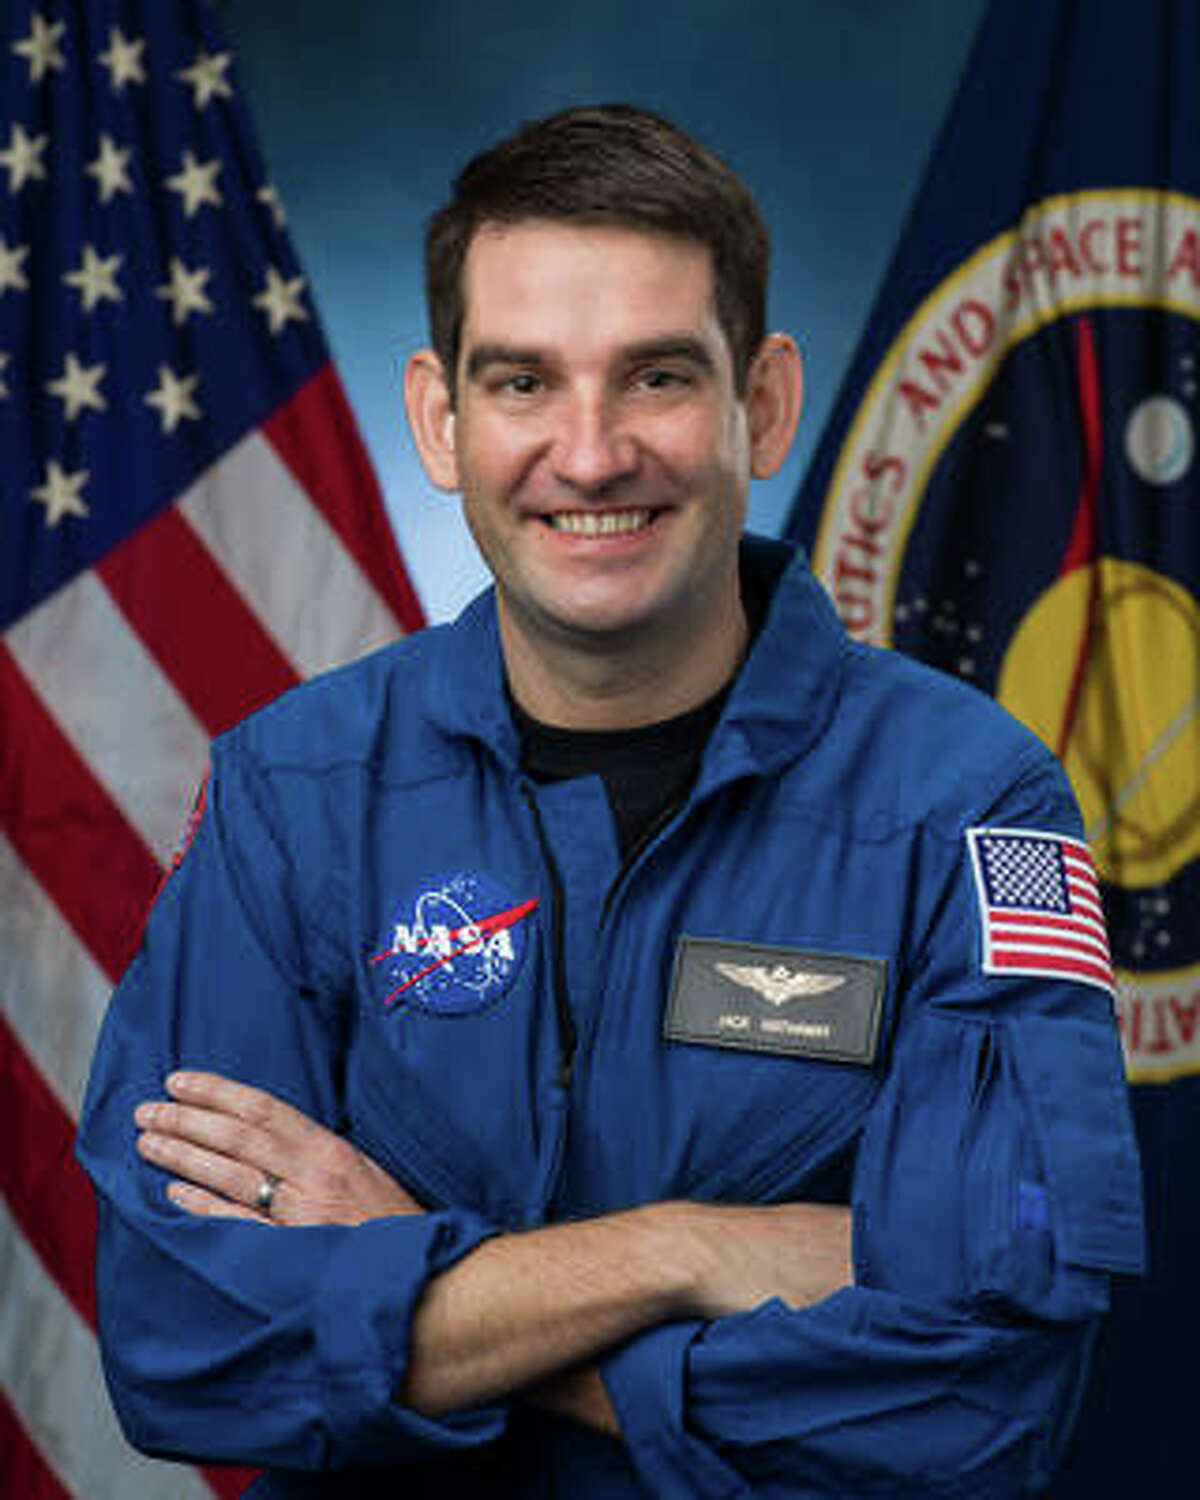 Astronaut candidate Jack Hathaway's  parents are from the Town of Saratoga. Hathaway is one of 10 selected to be an astronaut out of a field of 12,000.